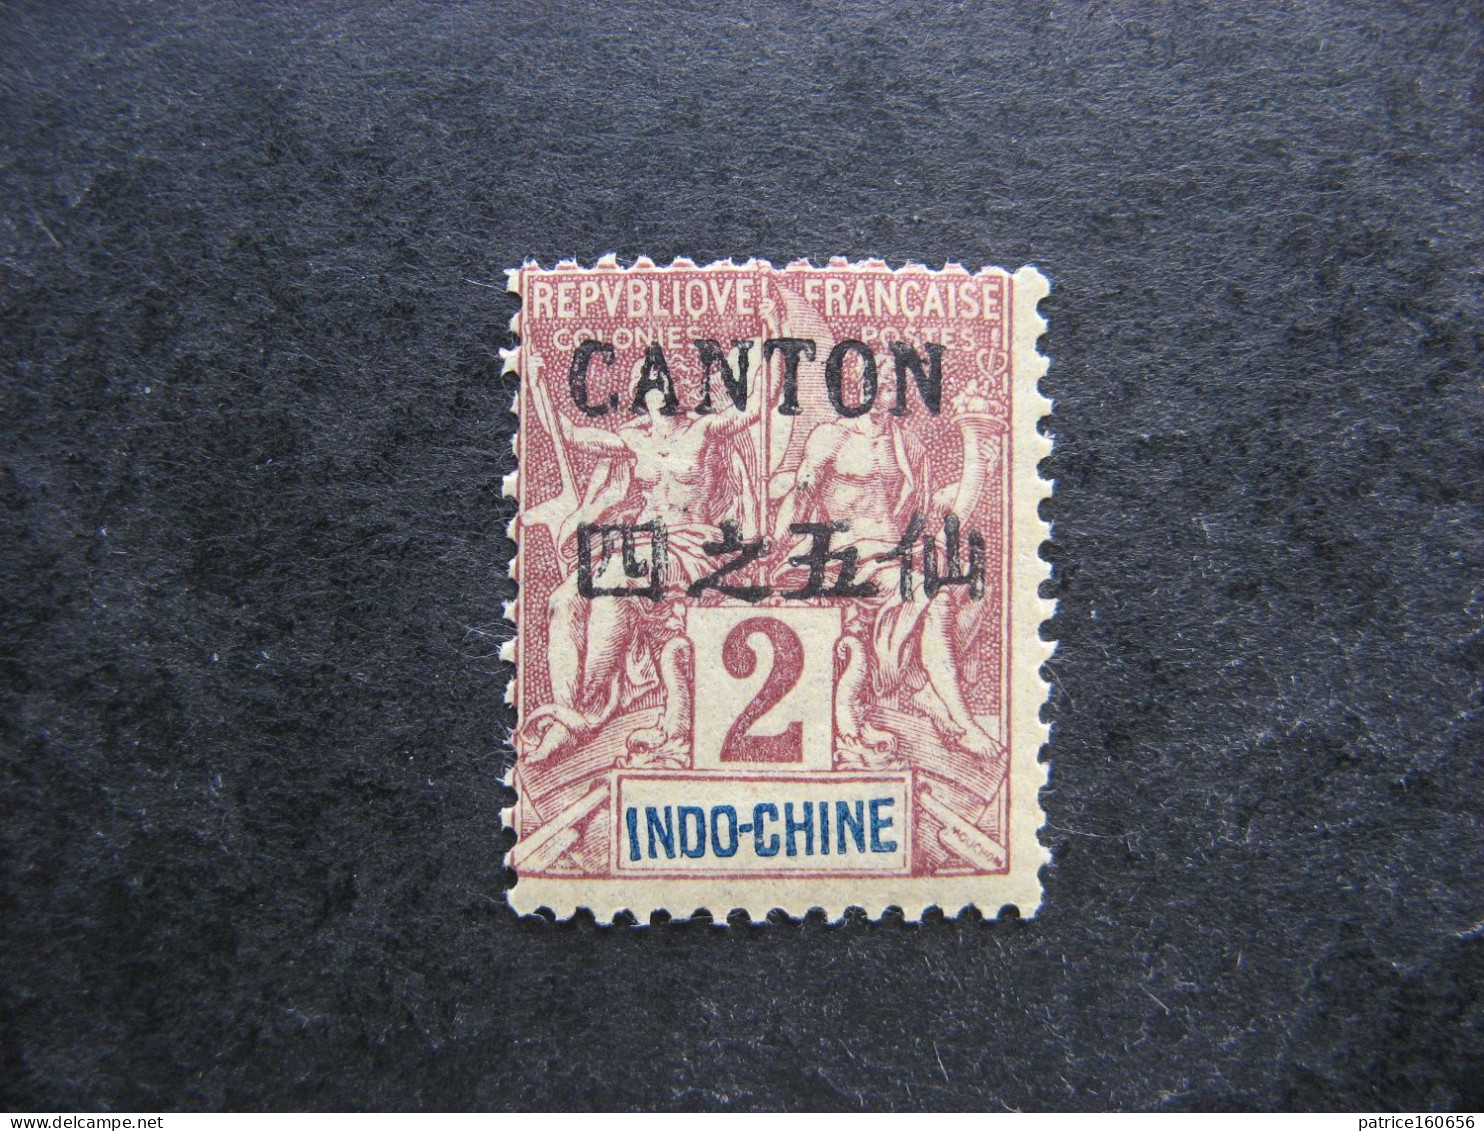 Canton: TB N° 18, Surcharge Chinoise Recto Verso, Neuf X. - Neufs